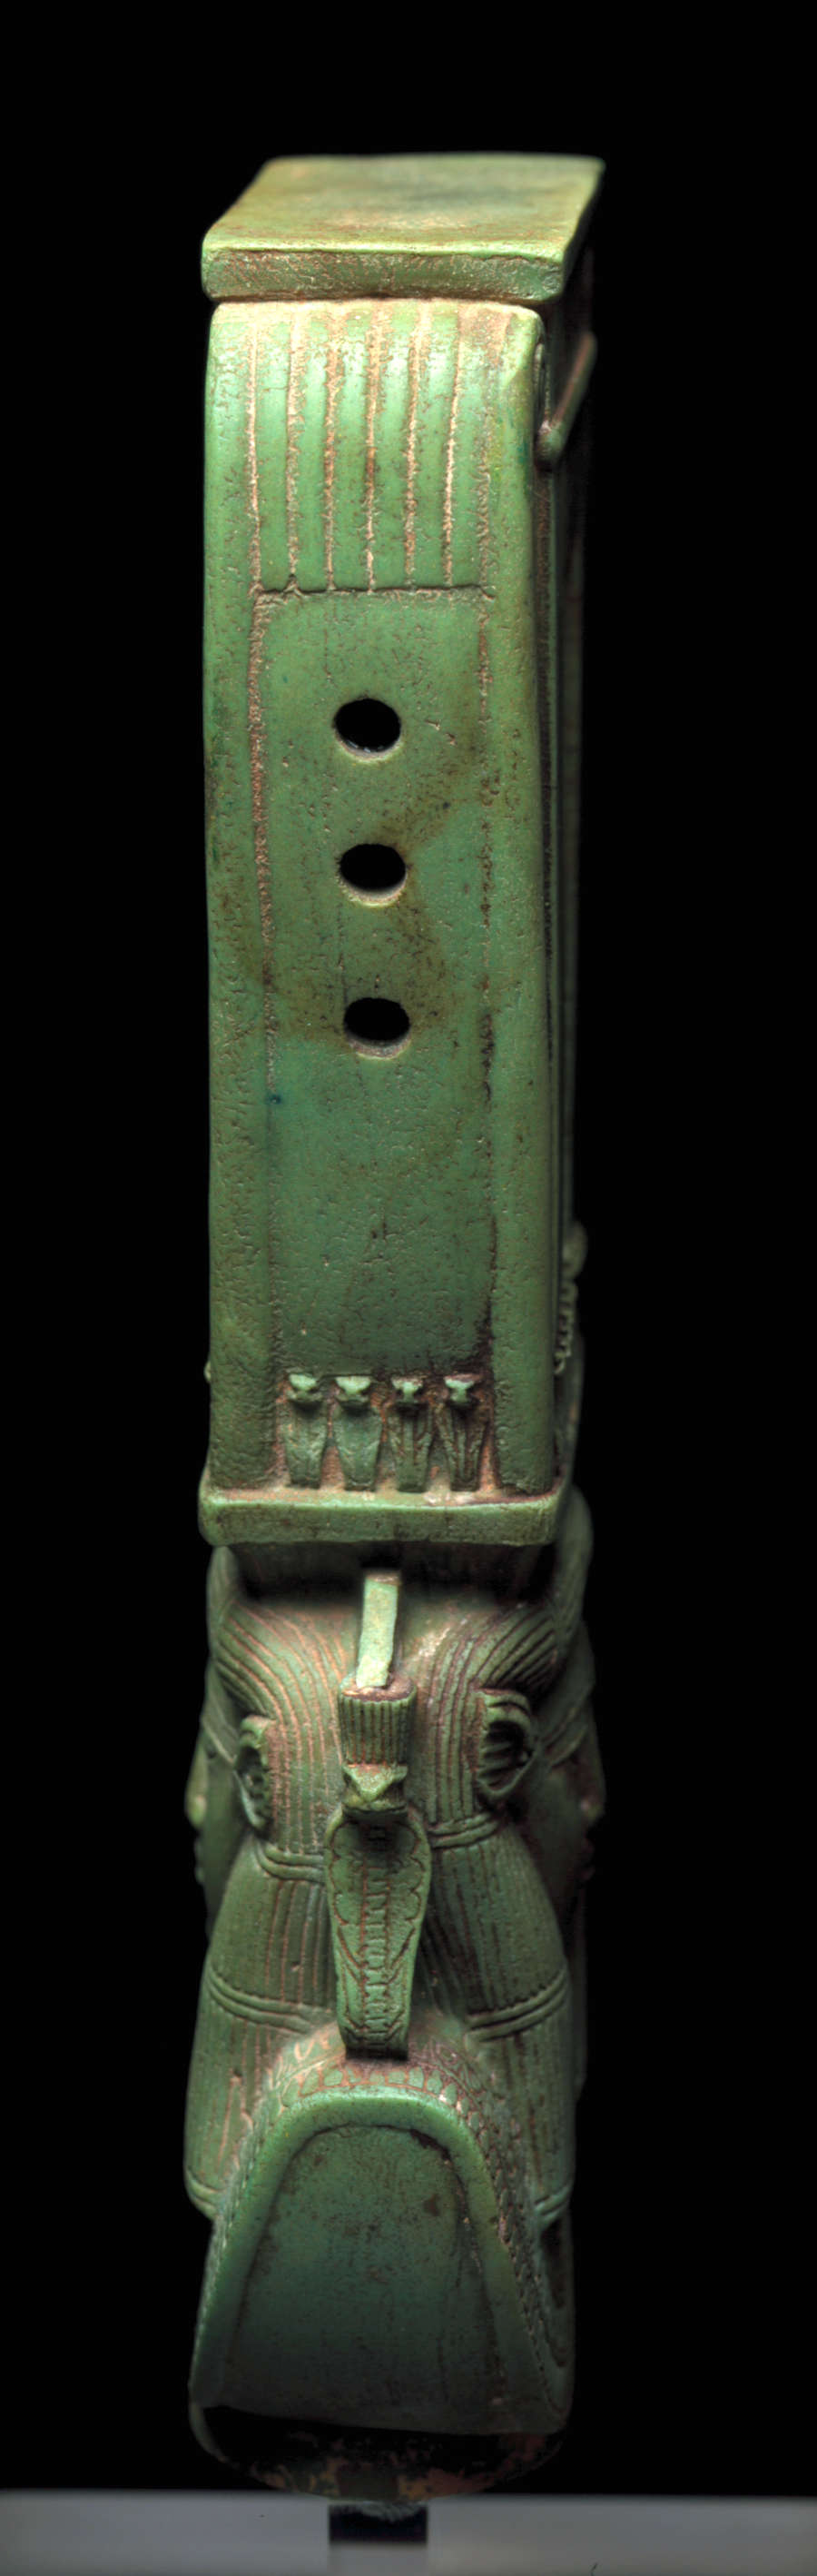 Side-view of a long jade-green sculpture depicting a collared figure’s head wearing a tall headdress. The headdress has three holds in the center and small snake figurines at the base. 